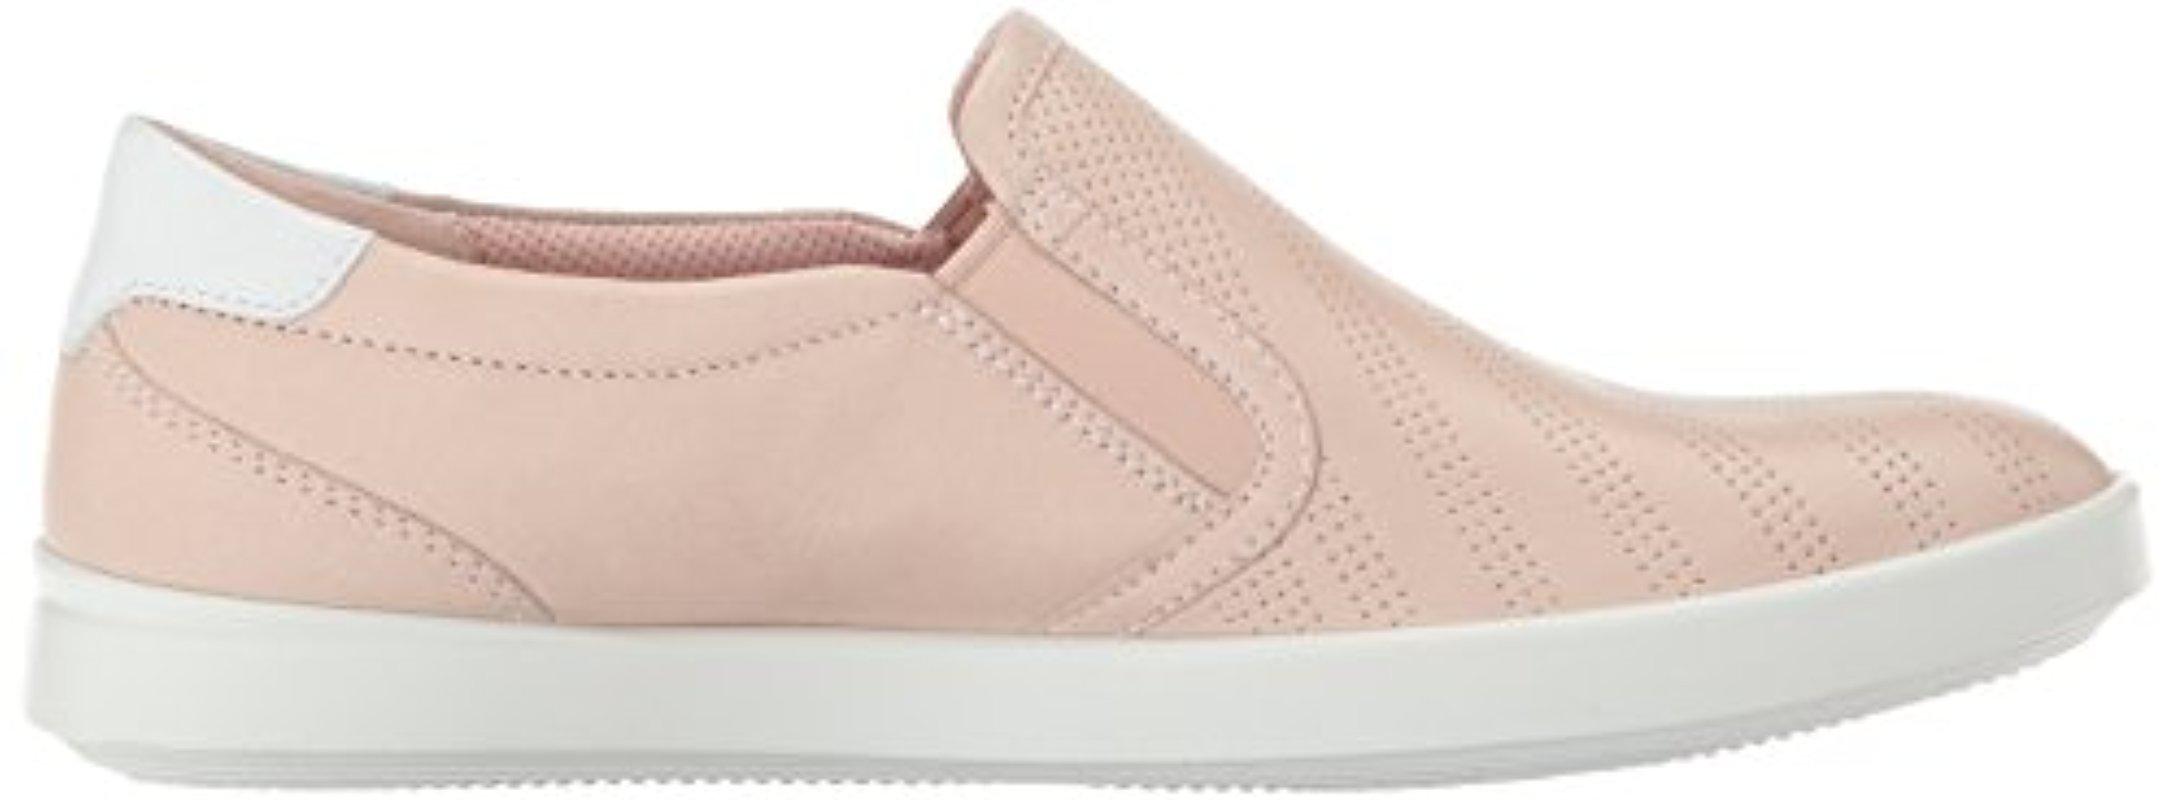 Ecco Leather Aimee Perforated Slip On Fashion Sneaker in Pink - Lyst